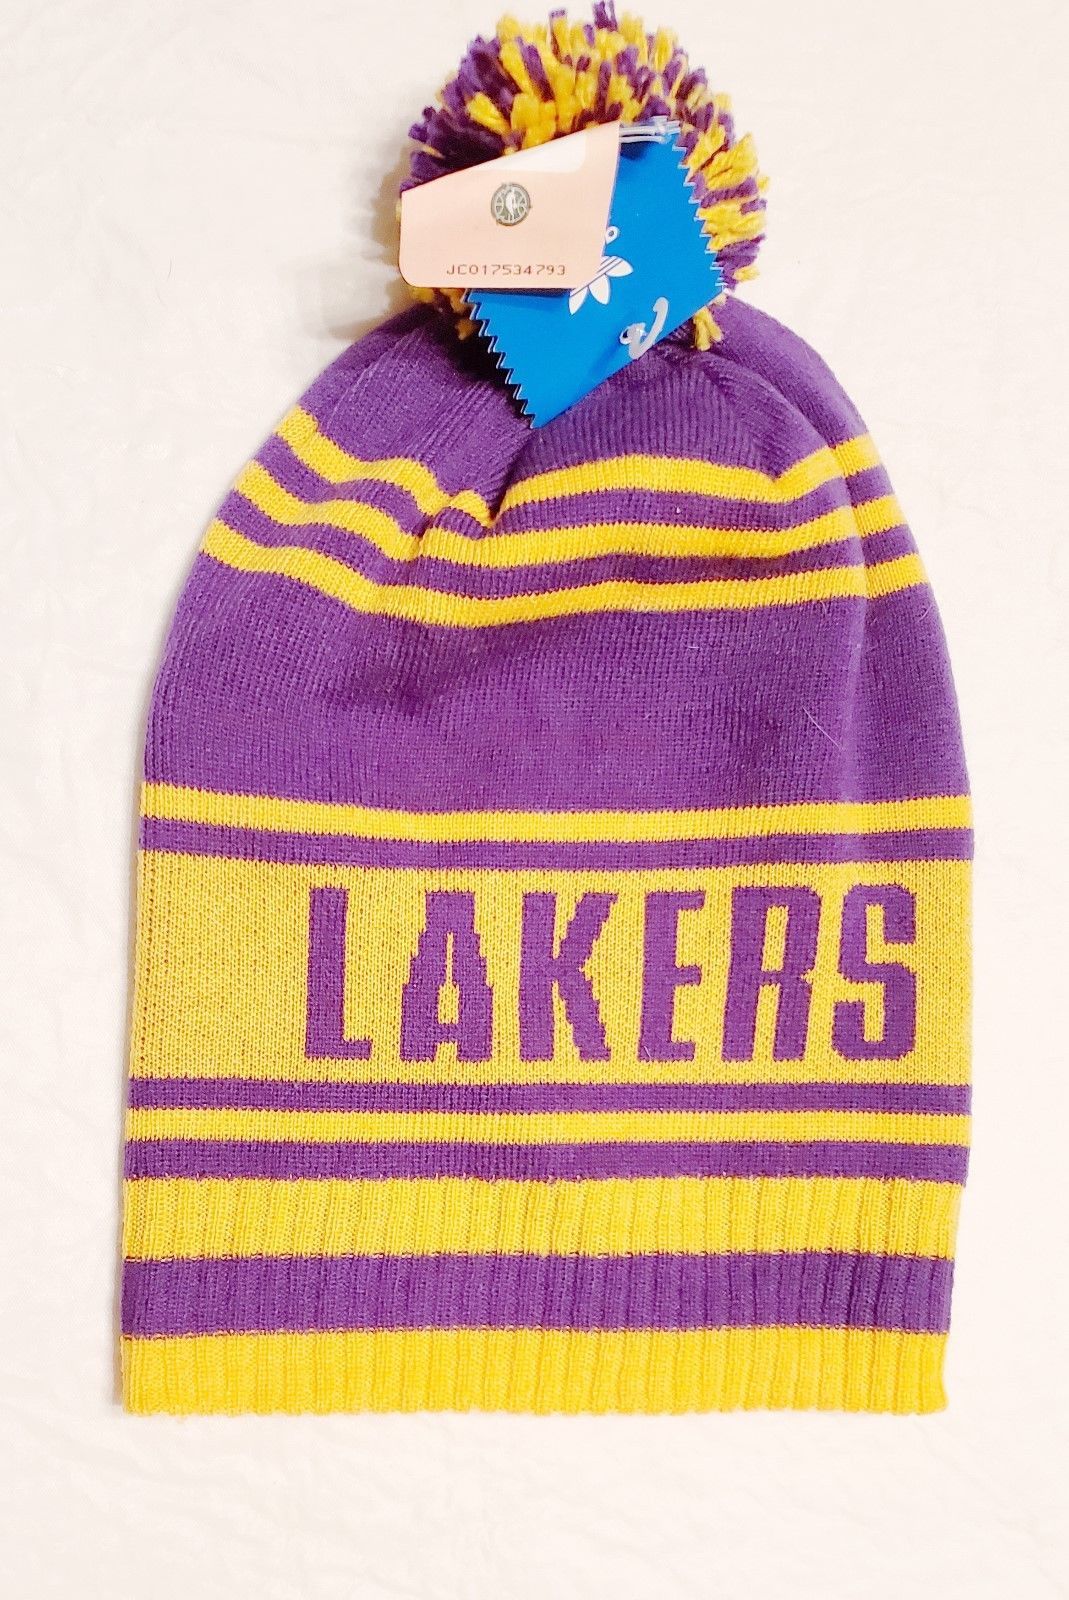 LOS ANGELES LAKERS KNIT BEANIE HAT CUFFLESS WITH POM PURPLE/GOLD ADIDAS